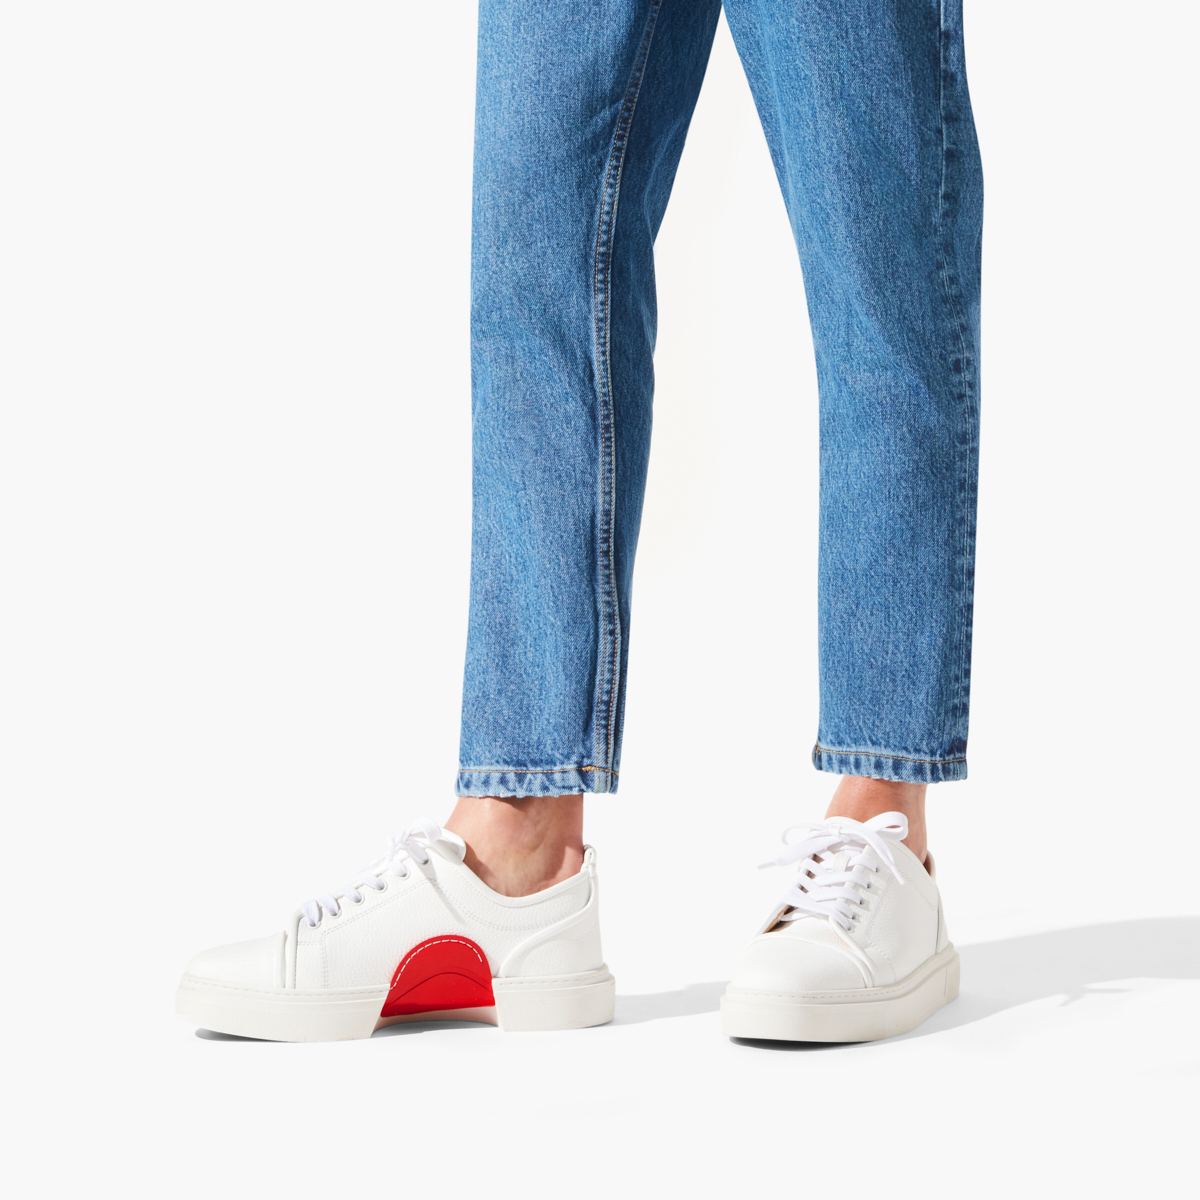 Christian Louboutin Designed Adolon Red Bottoms Sneakers ‣ BALRFITSTORE